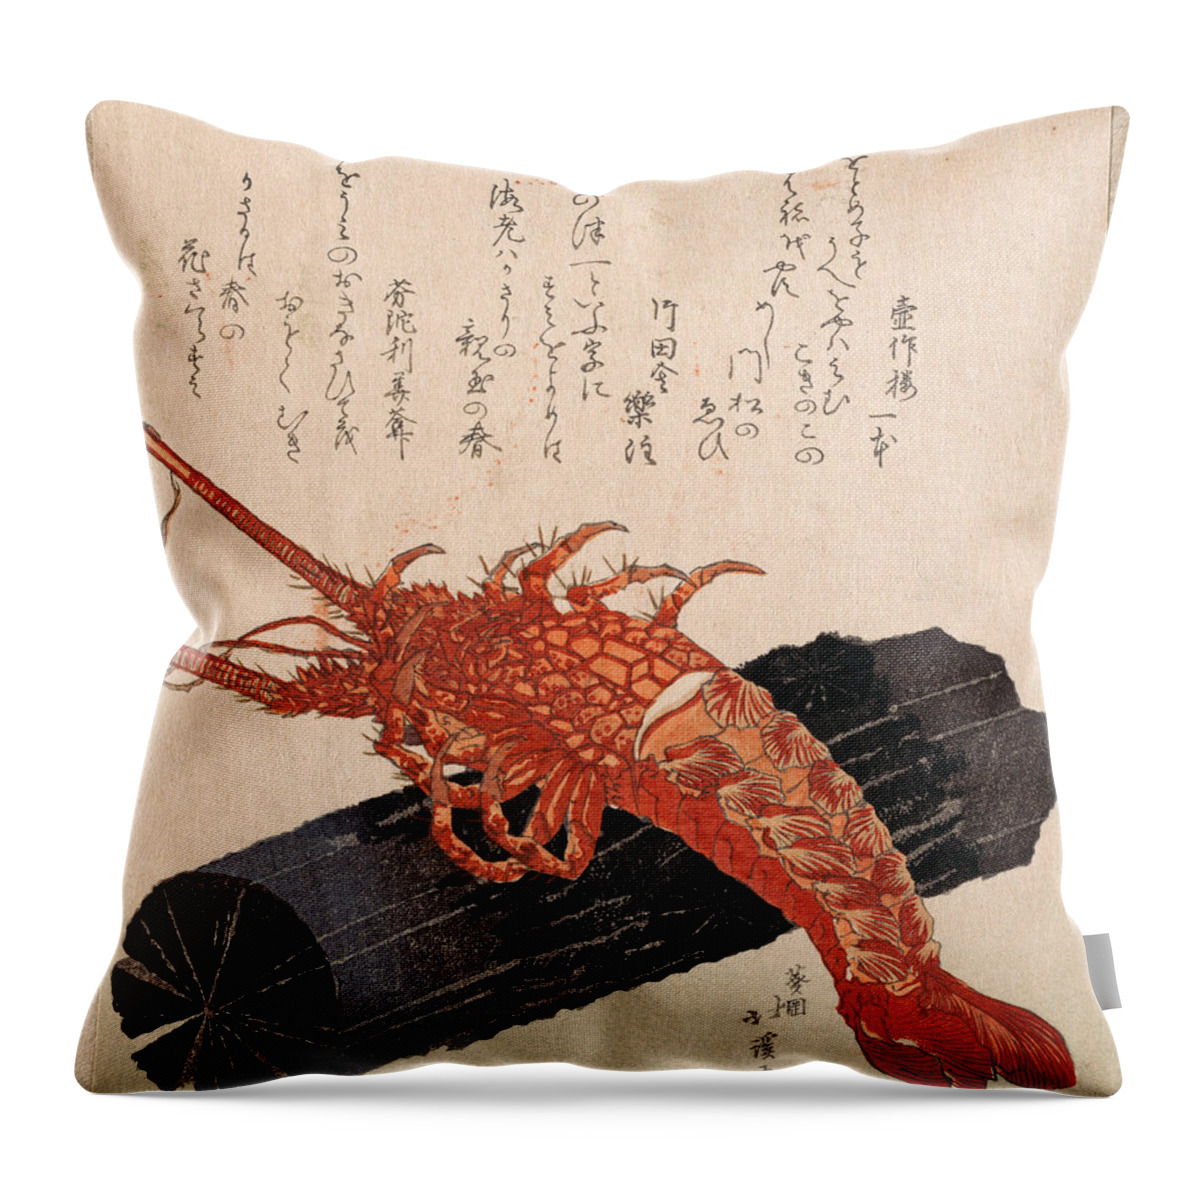 Totoya Hokkei Throw Pillow featuring the drawing Lobster on a Piece of Charcoal by Totoya Hokkei